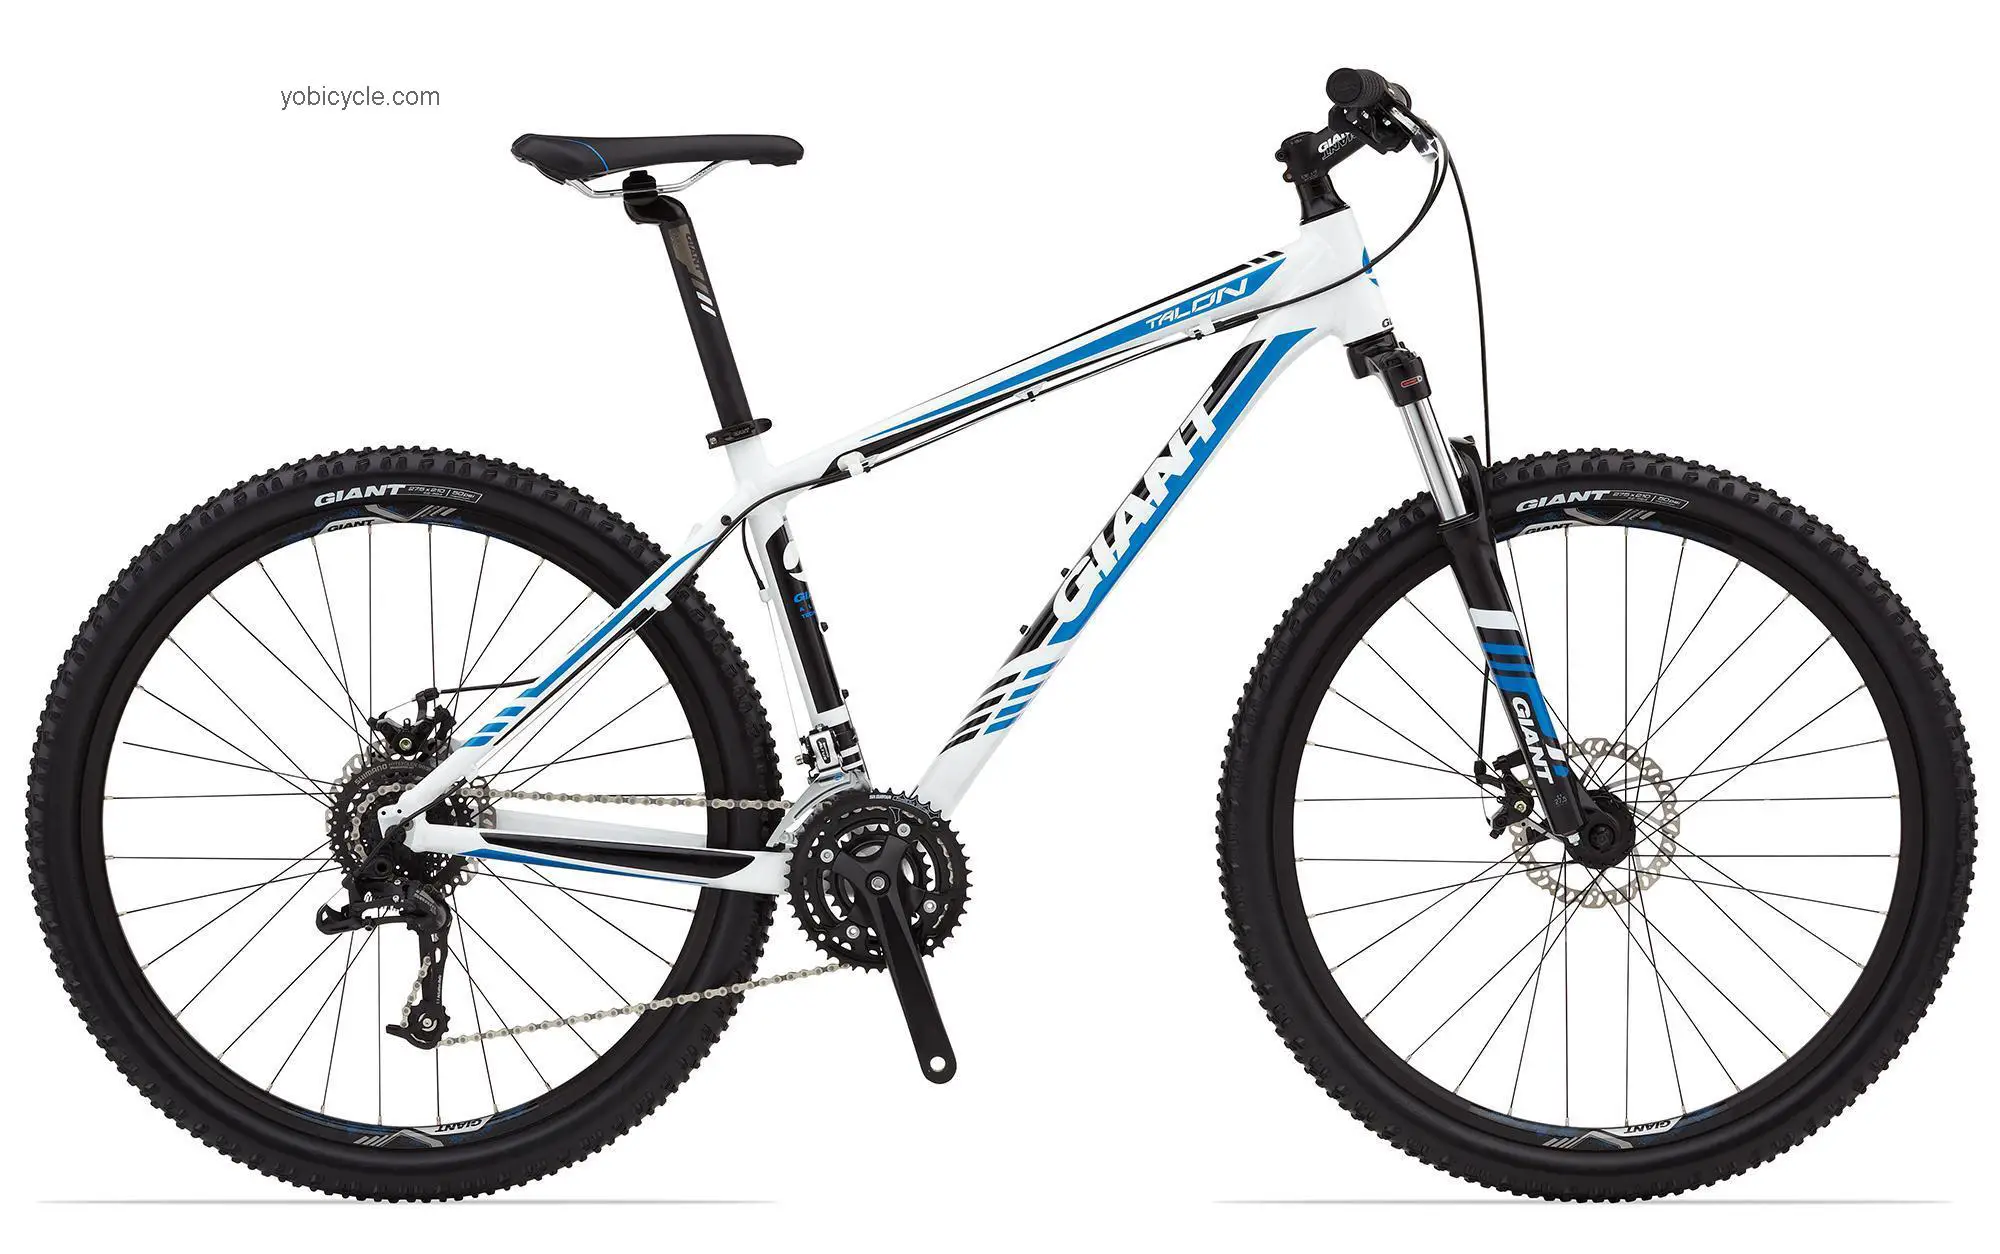 Giant  Talon 27.5 5 Technical data and specifications